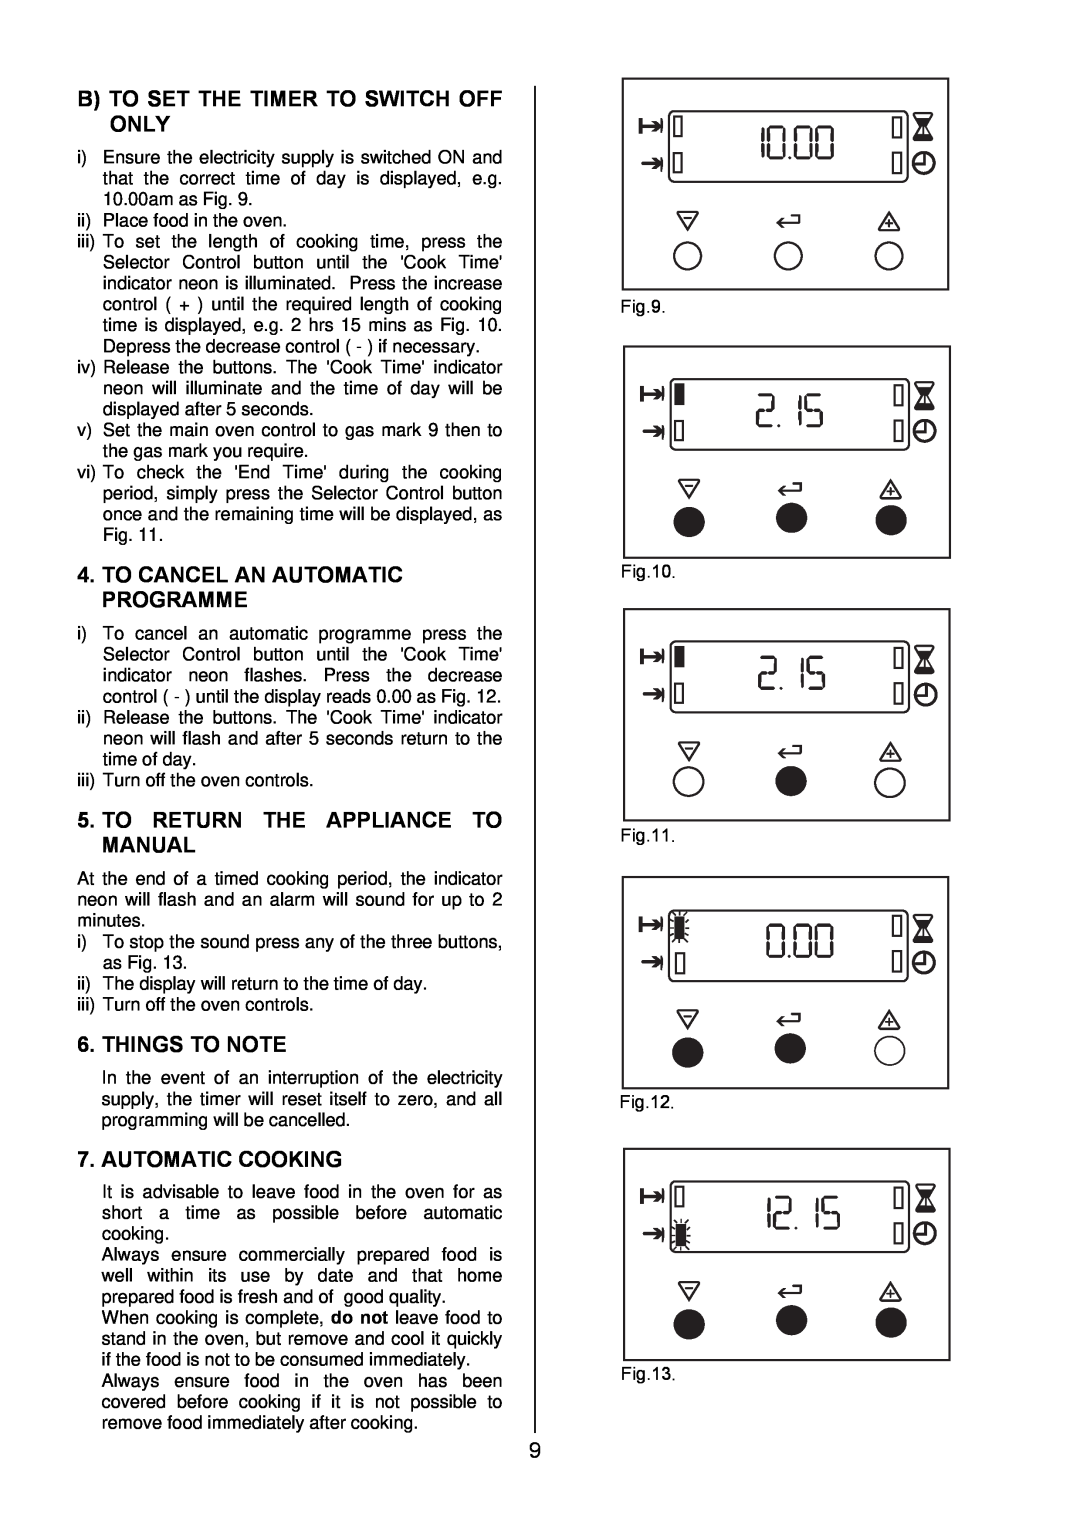 Electrolux EKG6046/EKG6047 manual B To Set The Timer To Switch Off Only, To Cancel An Automatic Programme, Things To Note 